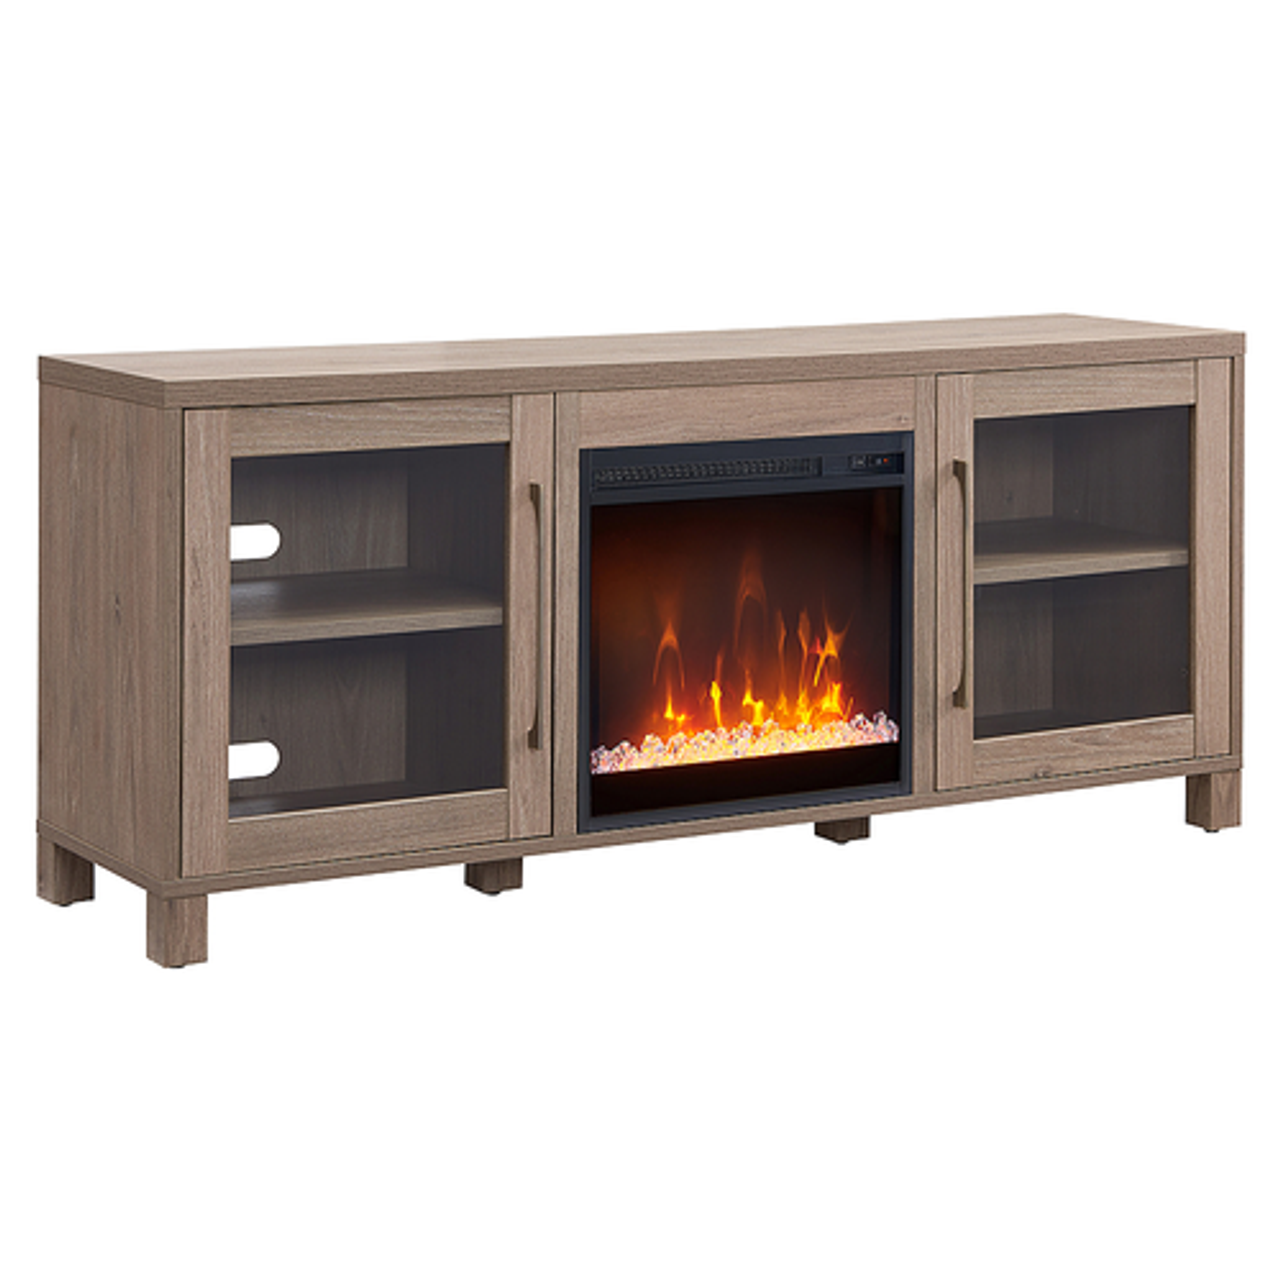 Camden&Wells - Quincy Crystal Fireplace TV Stand for TVs up to 65" - Antiqued Gray Oak